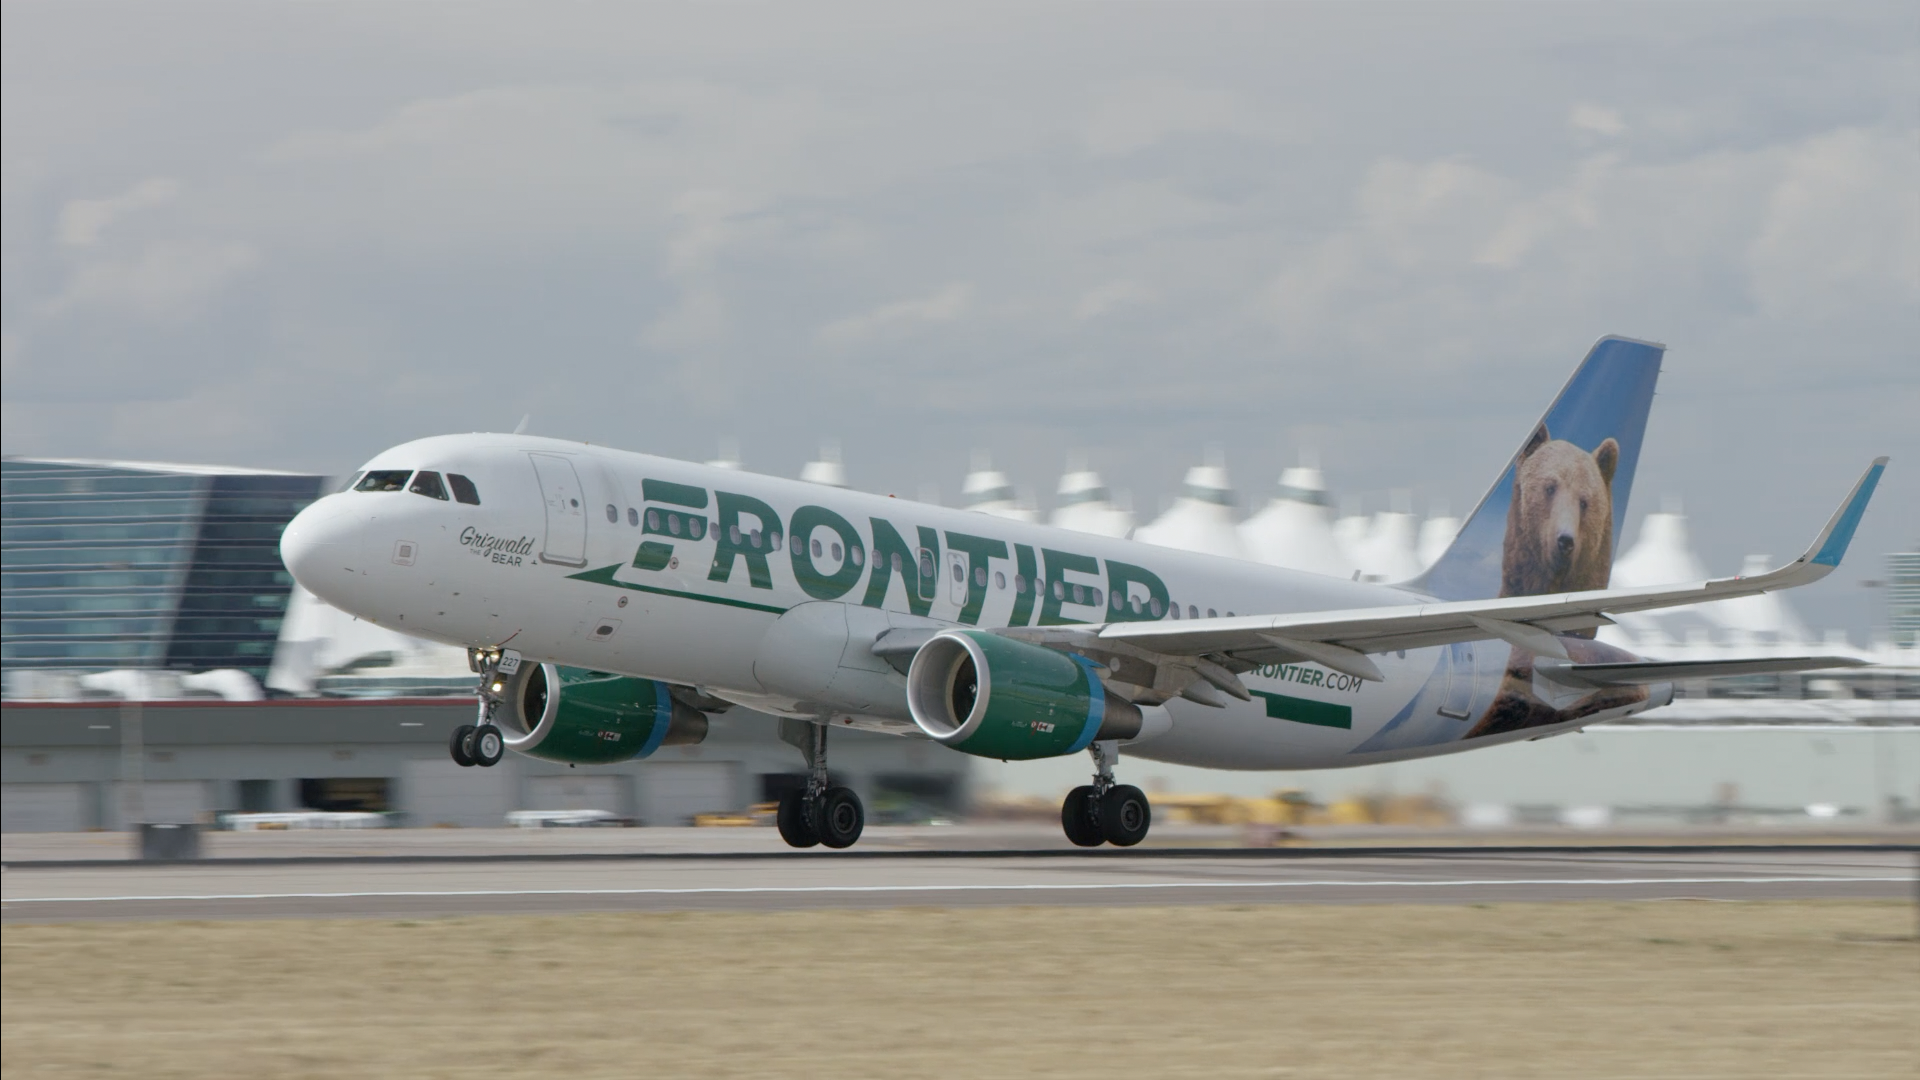 Frontier exclusively operates the A320 family of aircraft and has the largest A320neo fleet in the U.S., delivering the highest level of noise reduction and fuel-efficiency, compared to previous models